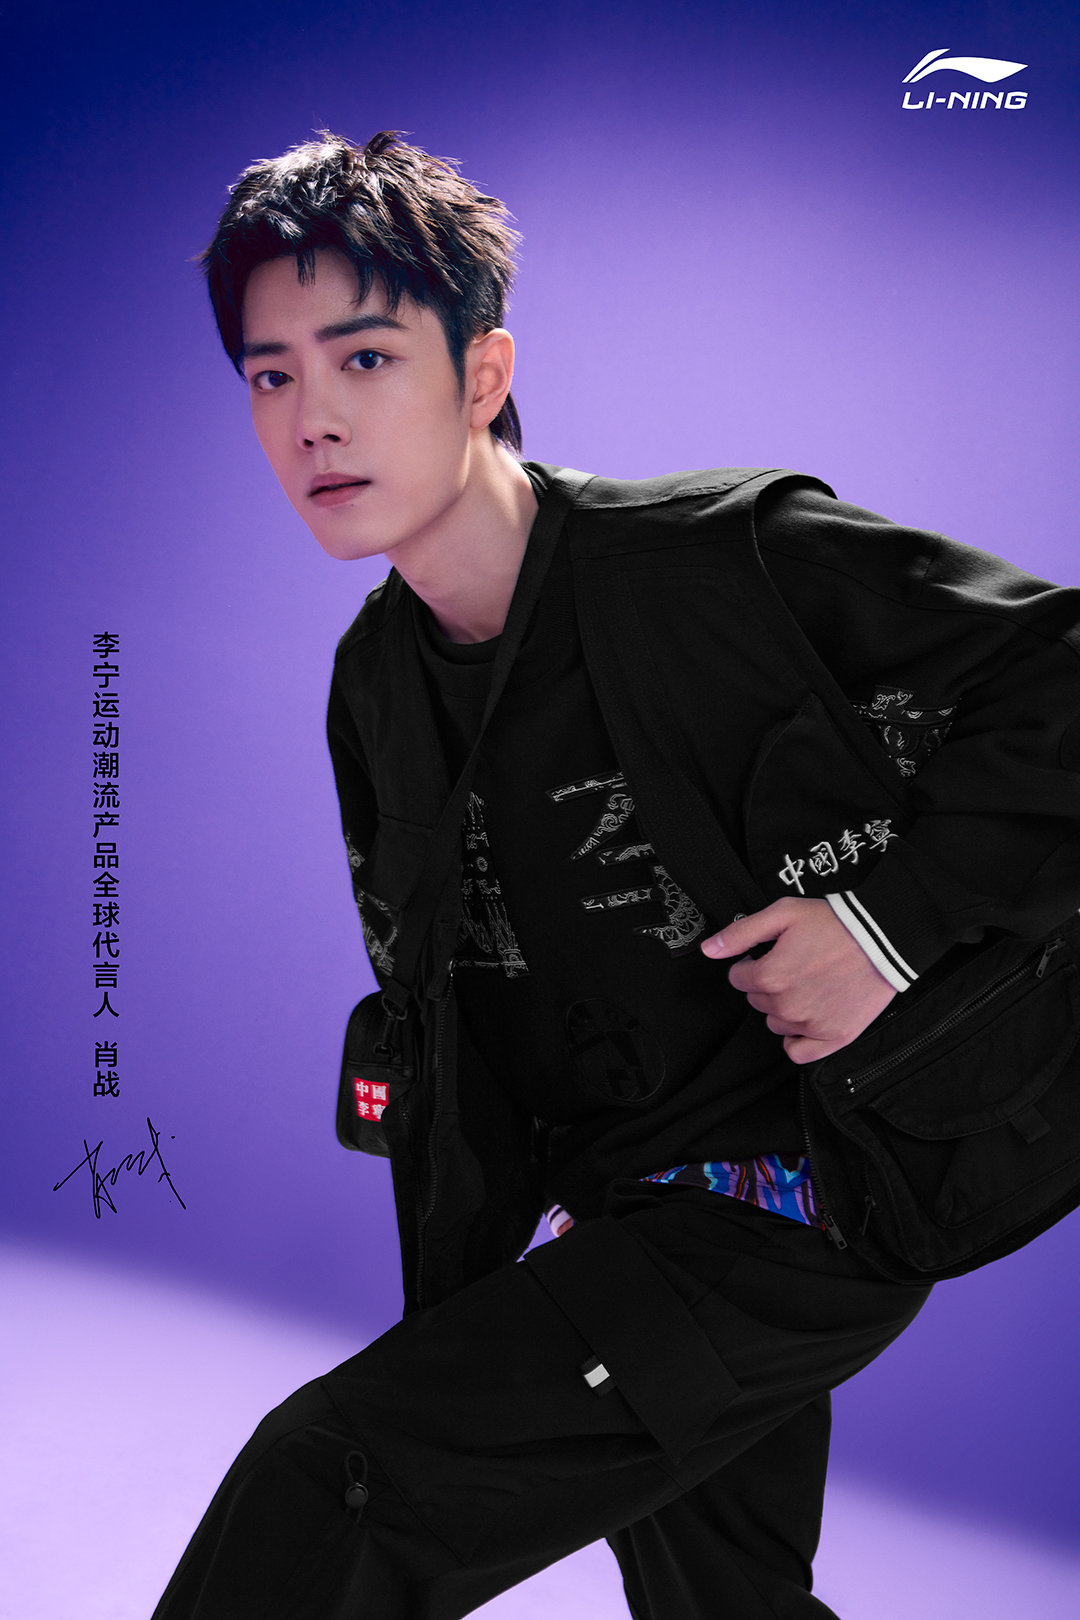 Heat up search: The autograph that resemble battle makes an appointment with Li Ning! The country is sufficient advocate handsome Li Tie, 